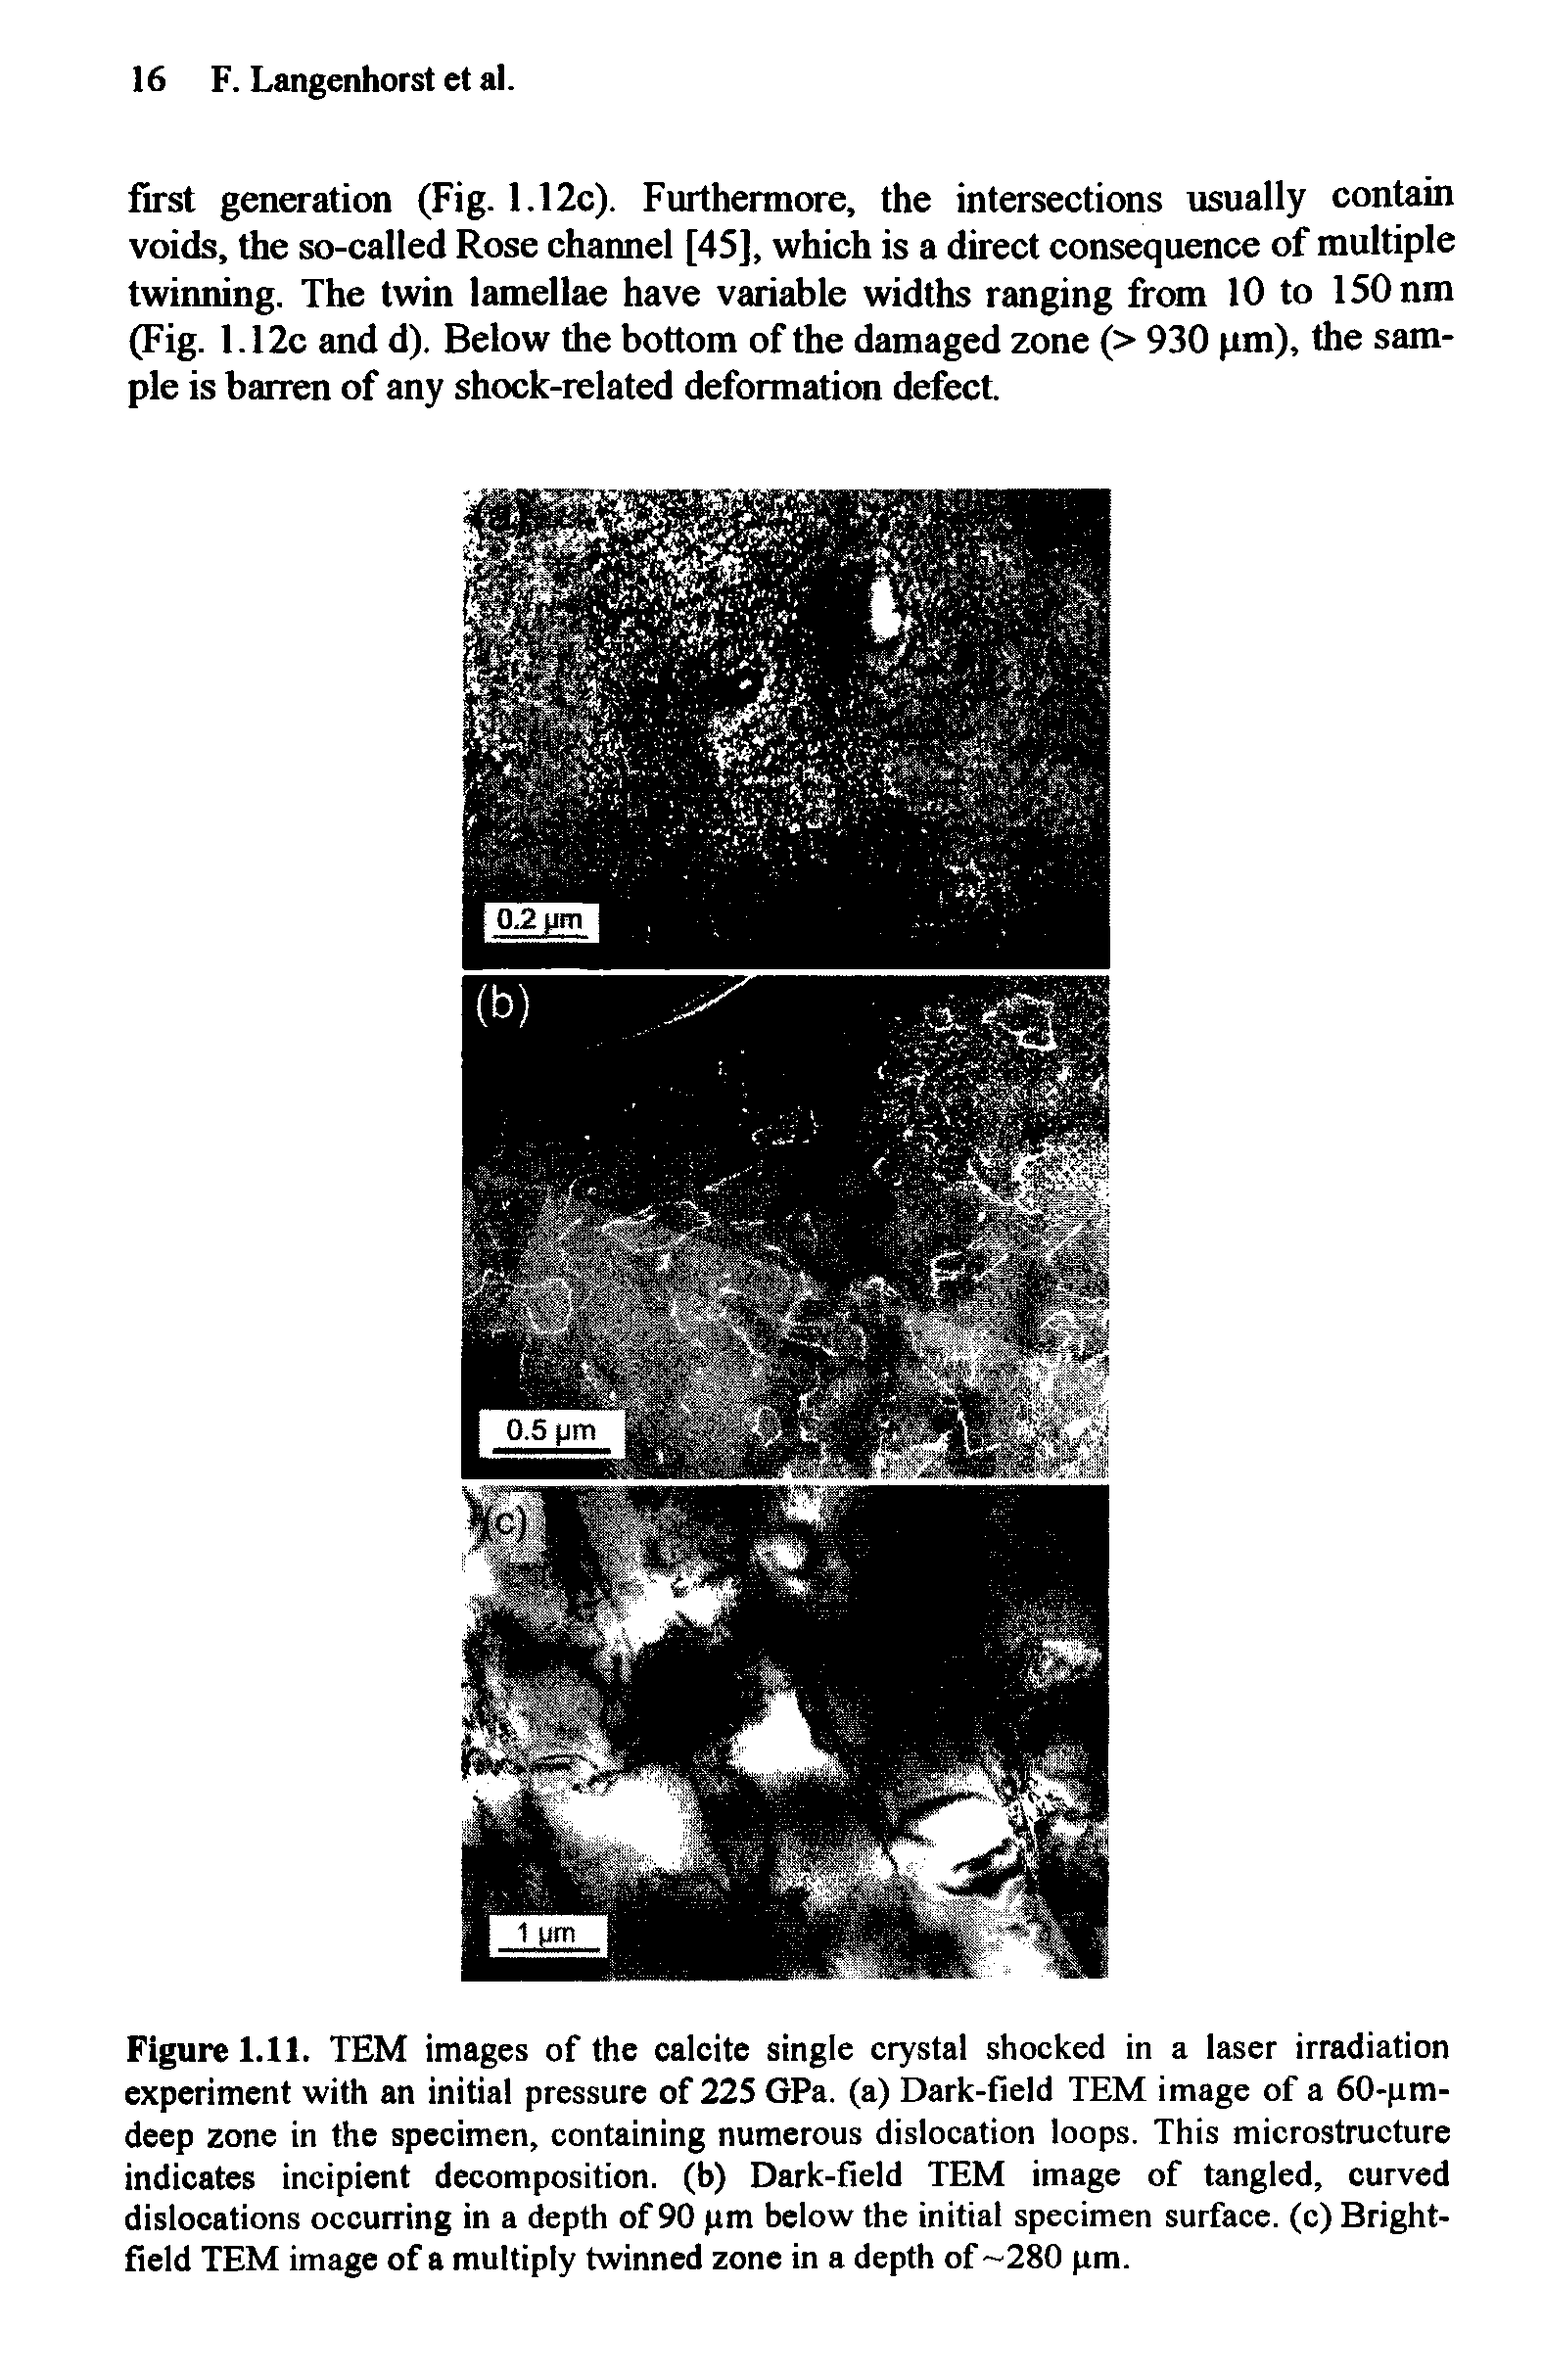 Figure 1.11. TEM images of the calcite single crystal shocked in a laser irradiation experiment with an initial pressure of 225 GPa. (a) Dark-field TEM image of a 60-pm-deep zone in the specimen, containing numerous dislocation loops. This microstructure indicates incipient decomposition, (b) Dark-field TEM image of tangled, curved dislocations occurring in a depth of 90 pm below the initial specimen surface, (c) Bright-field TEM image of a multiply twinned zone in a depth of-280 pm.